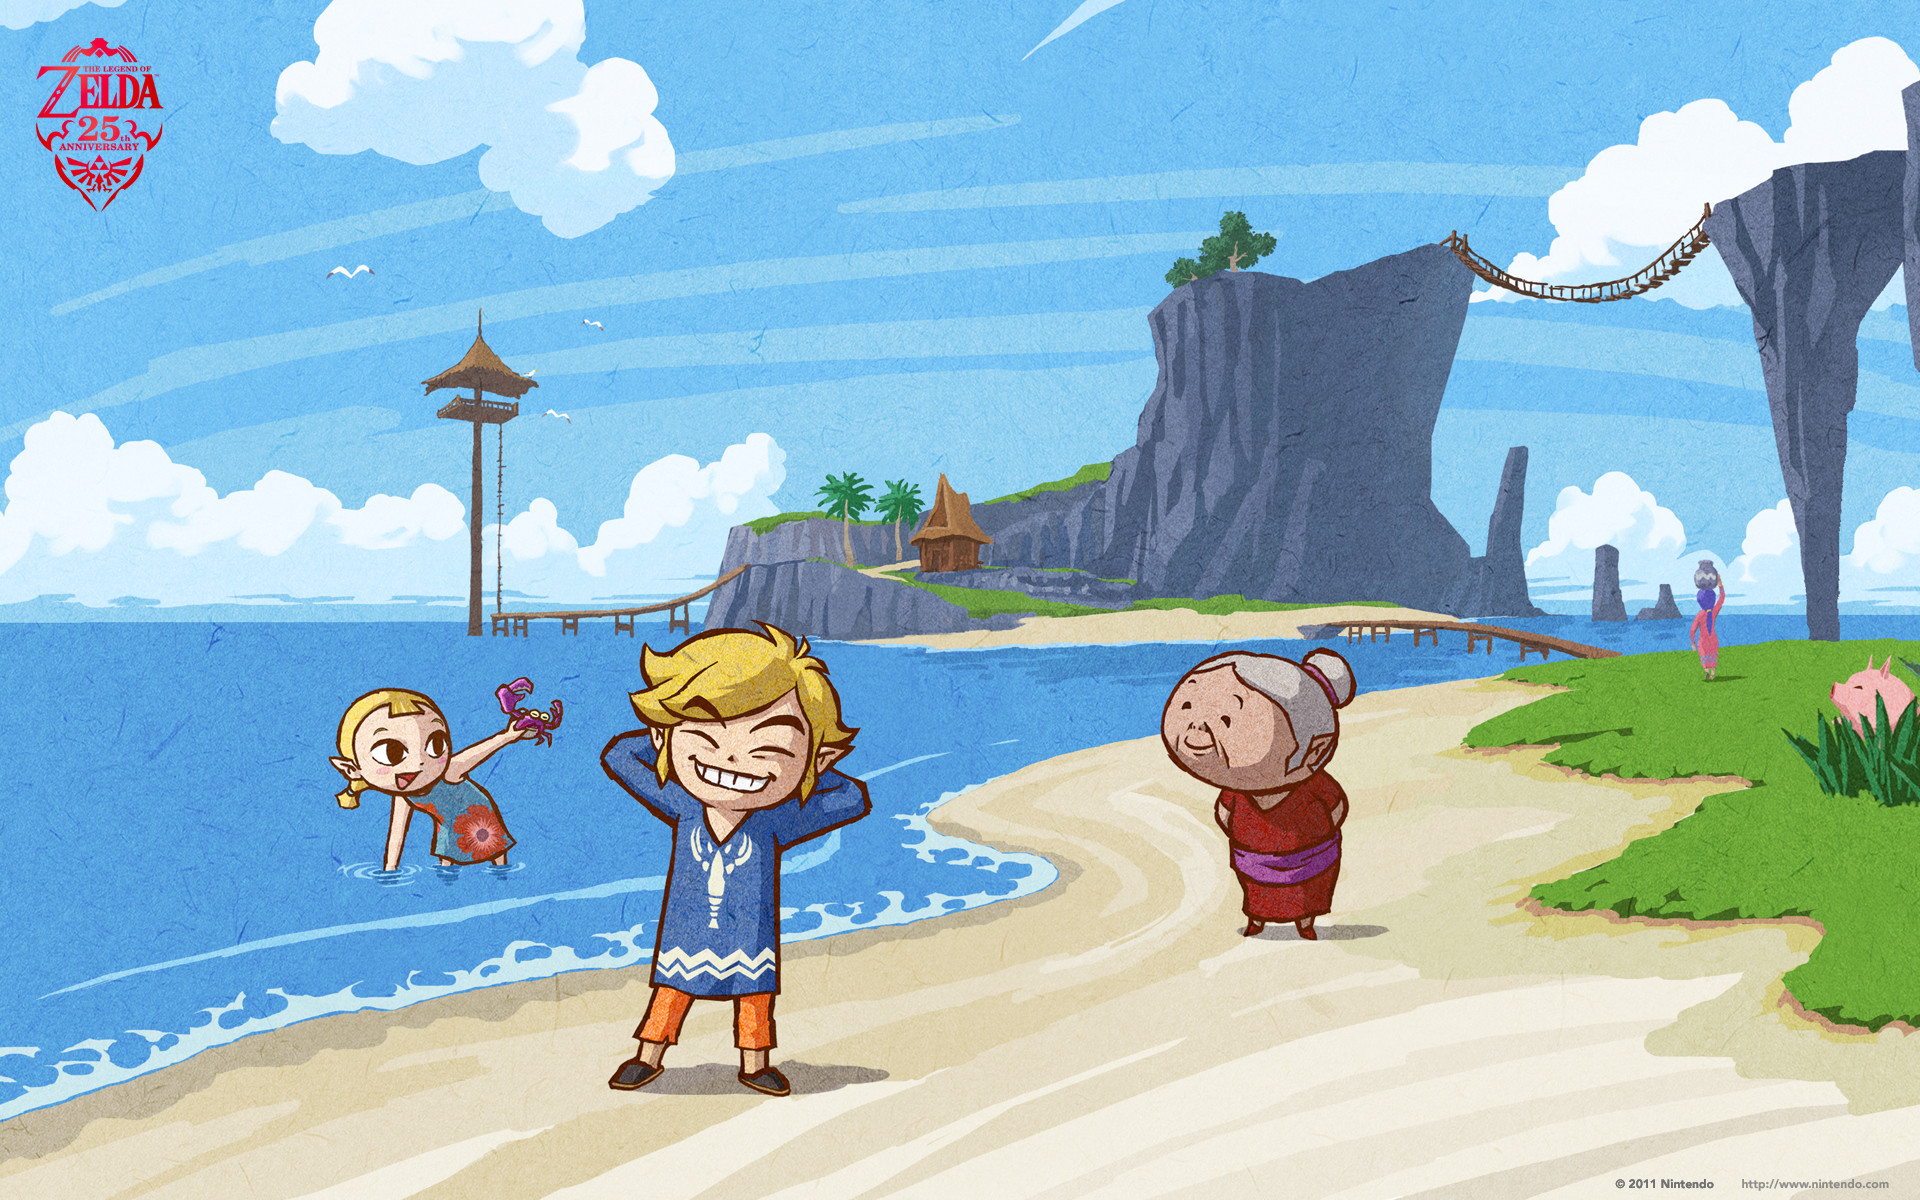 1920x1200 The Legend of Zelda Wallpaper (The Wind Waker) – Link's Sis and Grandma On  Beach